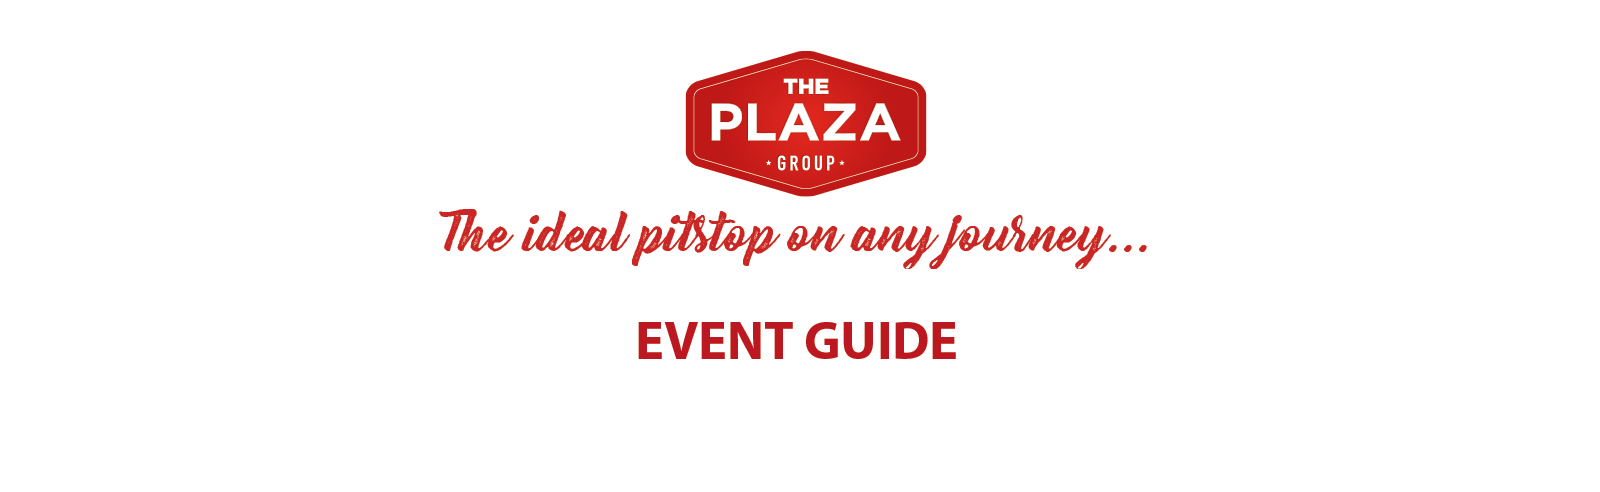 The Plaza Group Event Guide